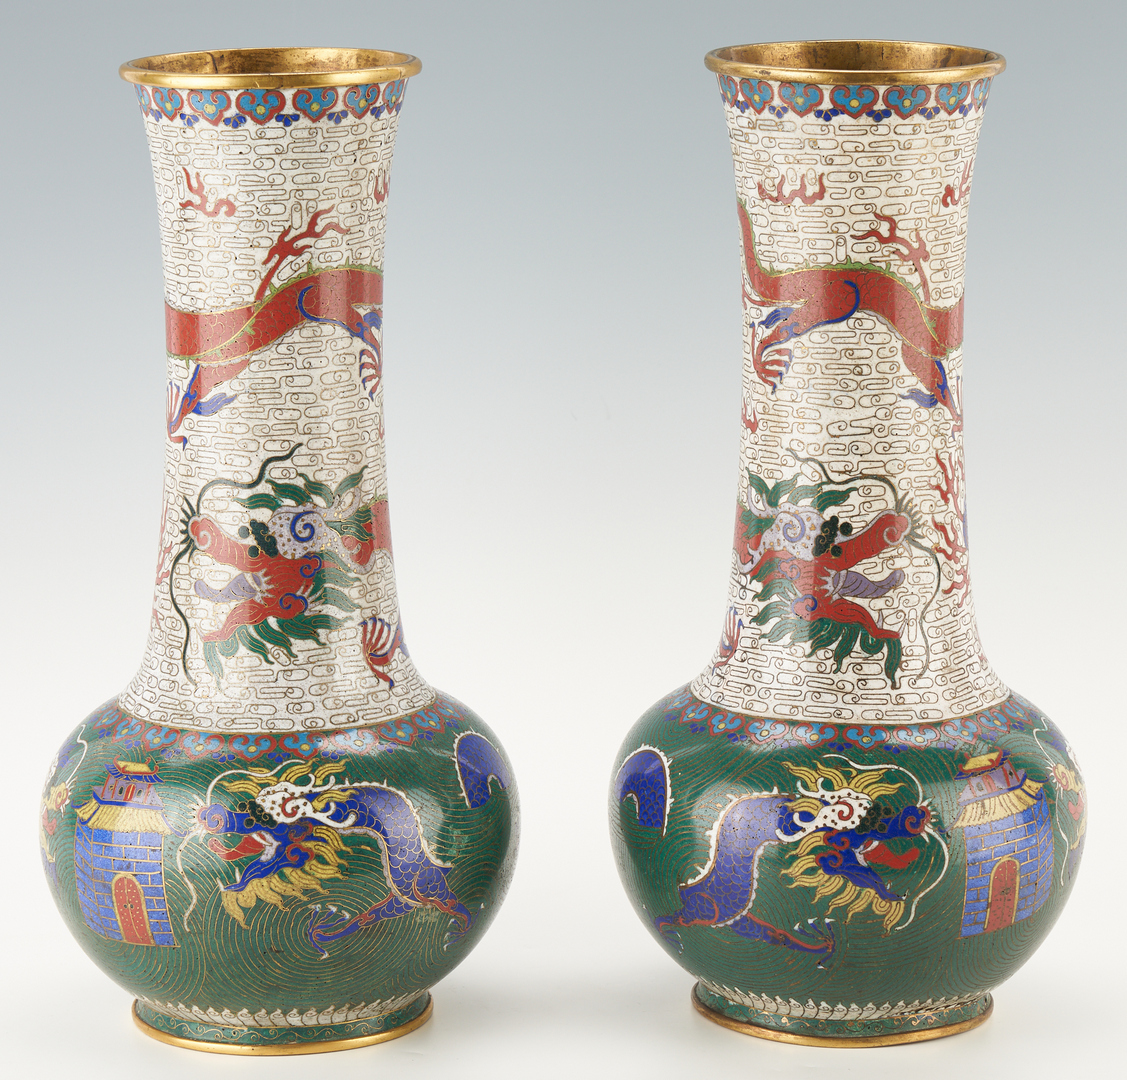 Lot 11: Large Pair of Chinese Cloissone Dragon Urns